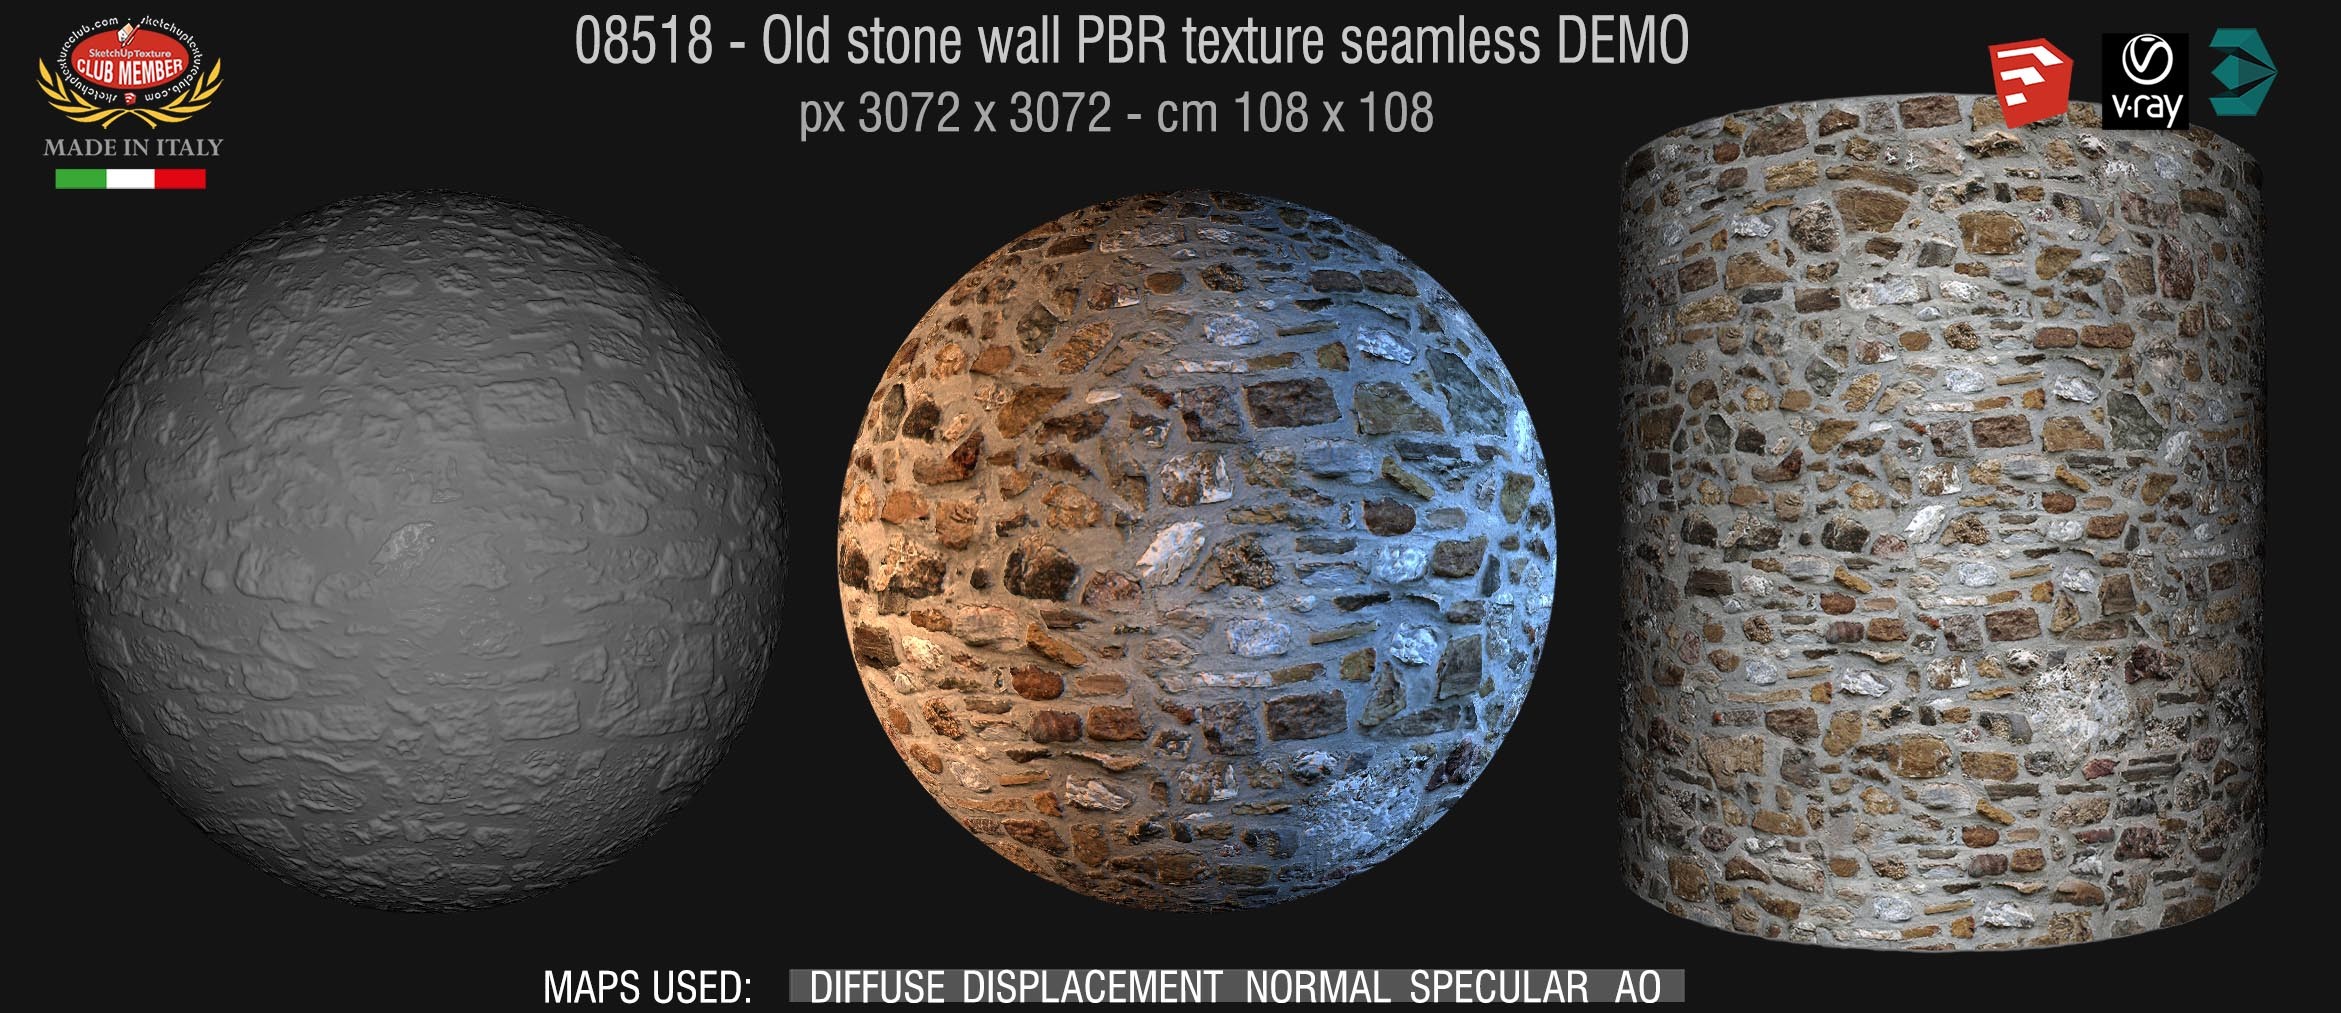 08518 Old stone wall PBR texture seamless DEMO